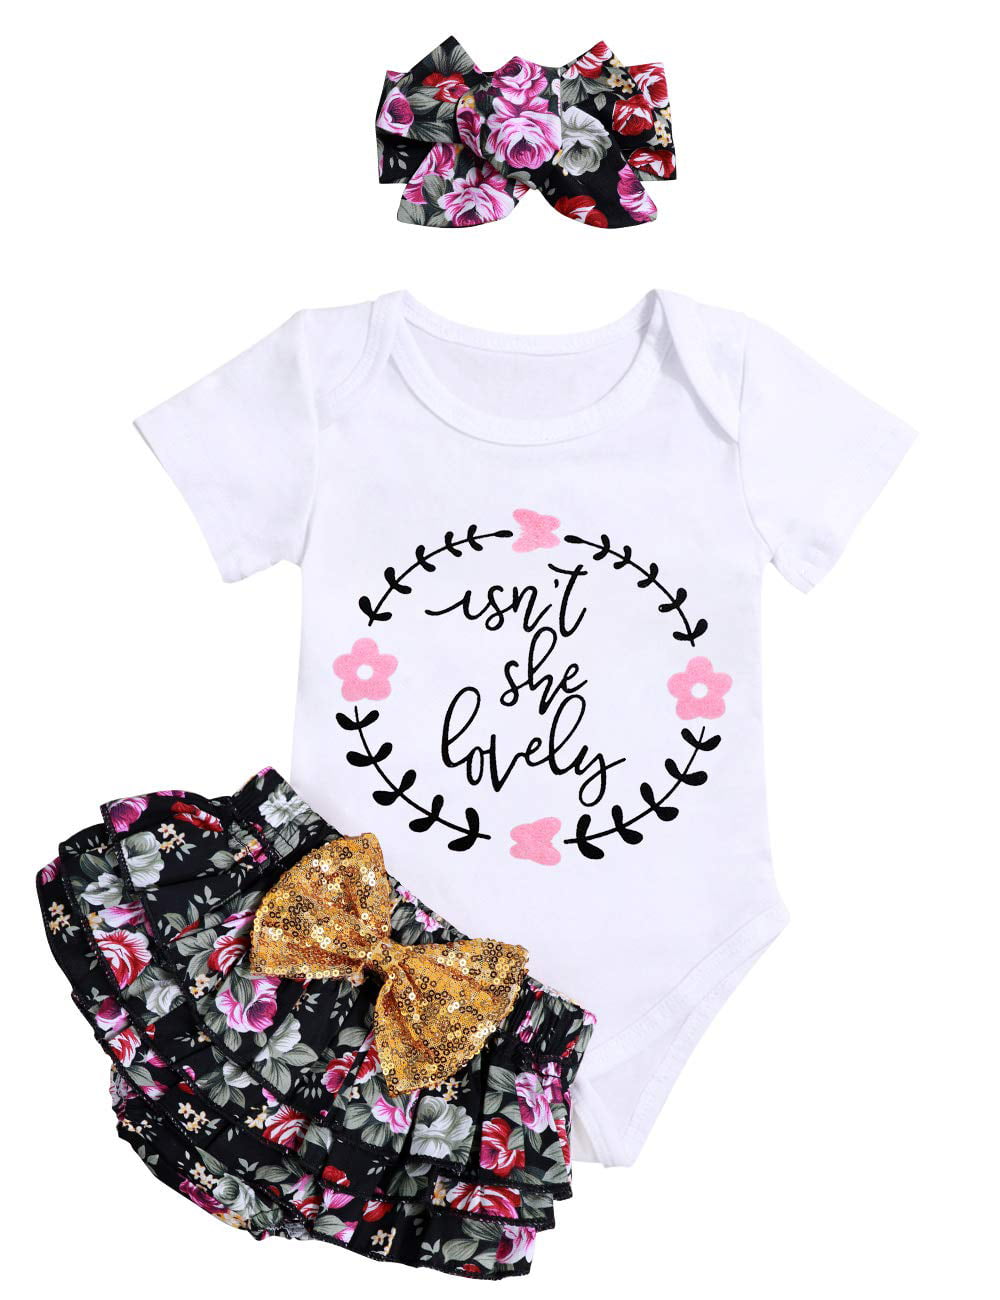 Infant Baby Girls Floral Outfit Set Blessed Print Romper Floral Ruffle Shorts Clothes with Headband